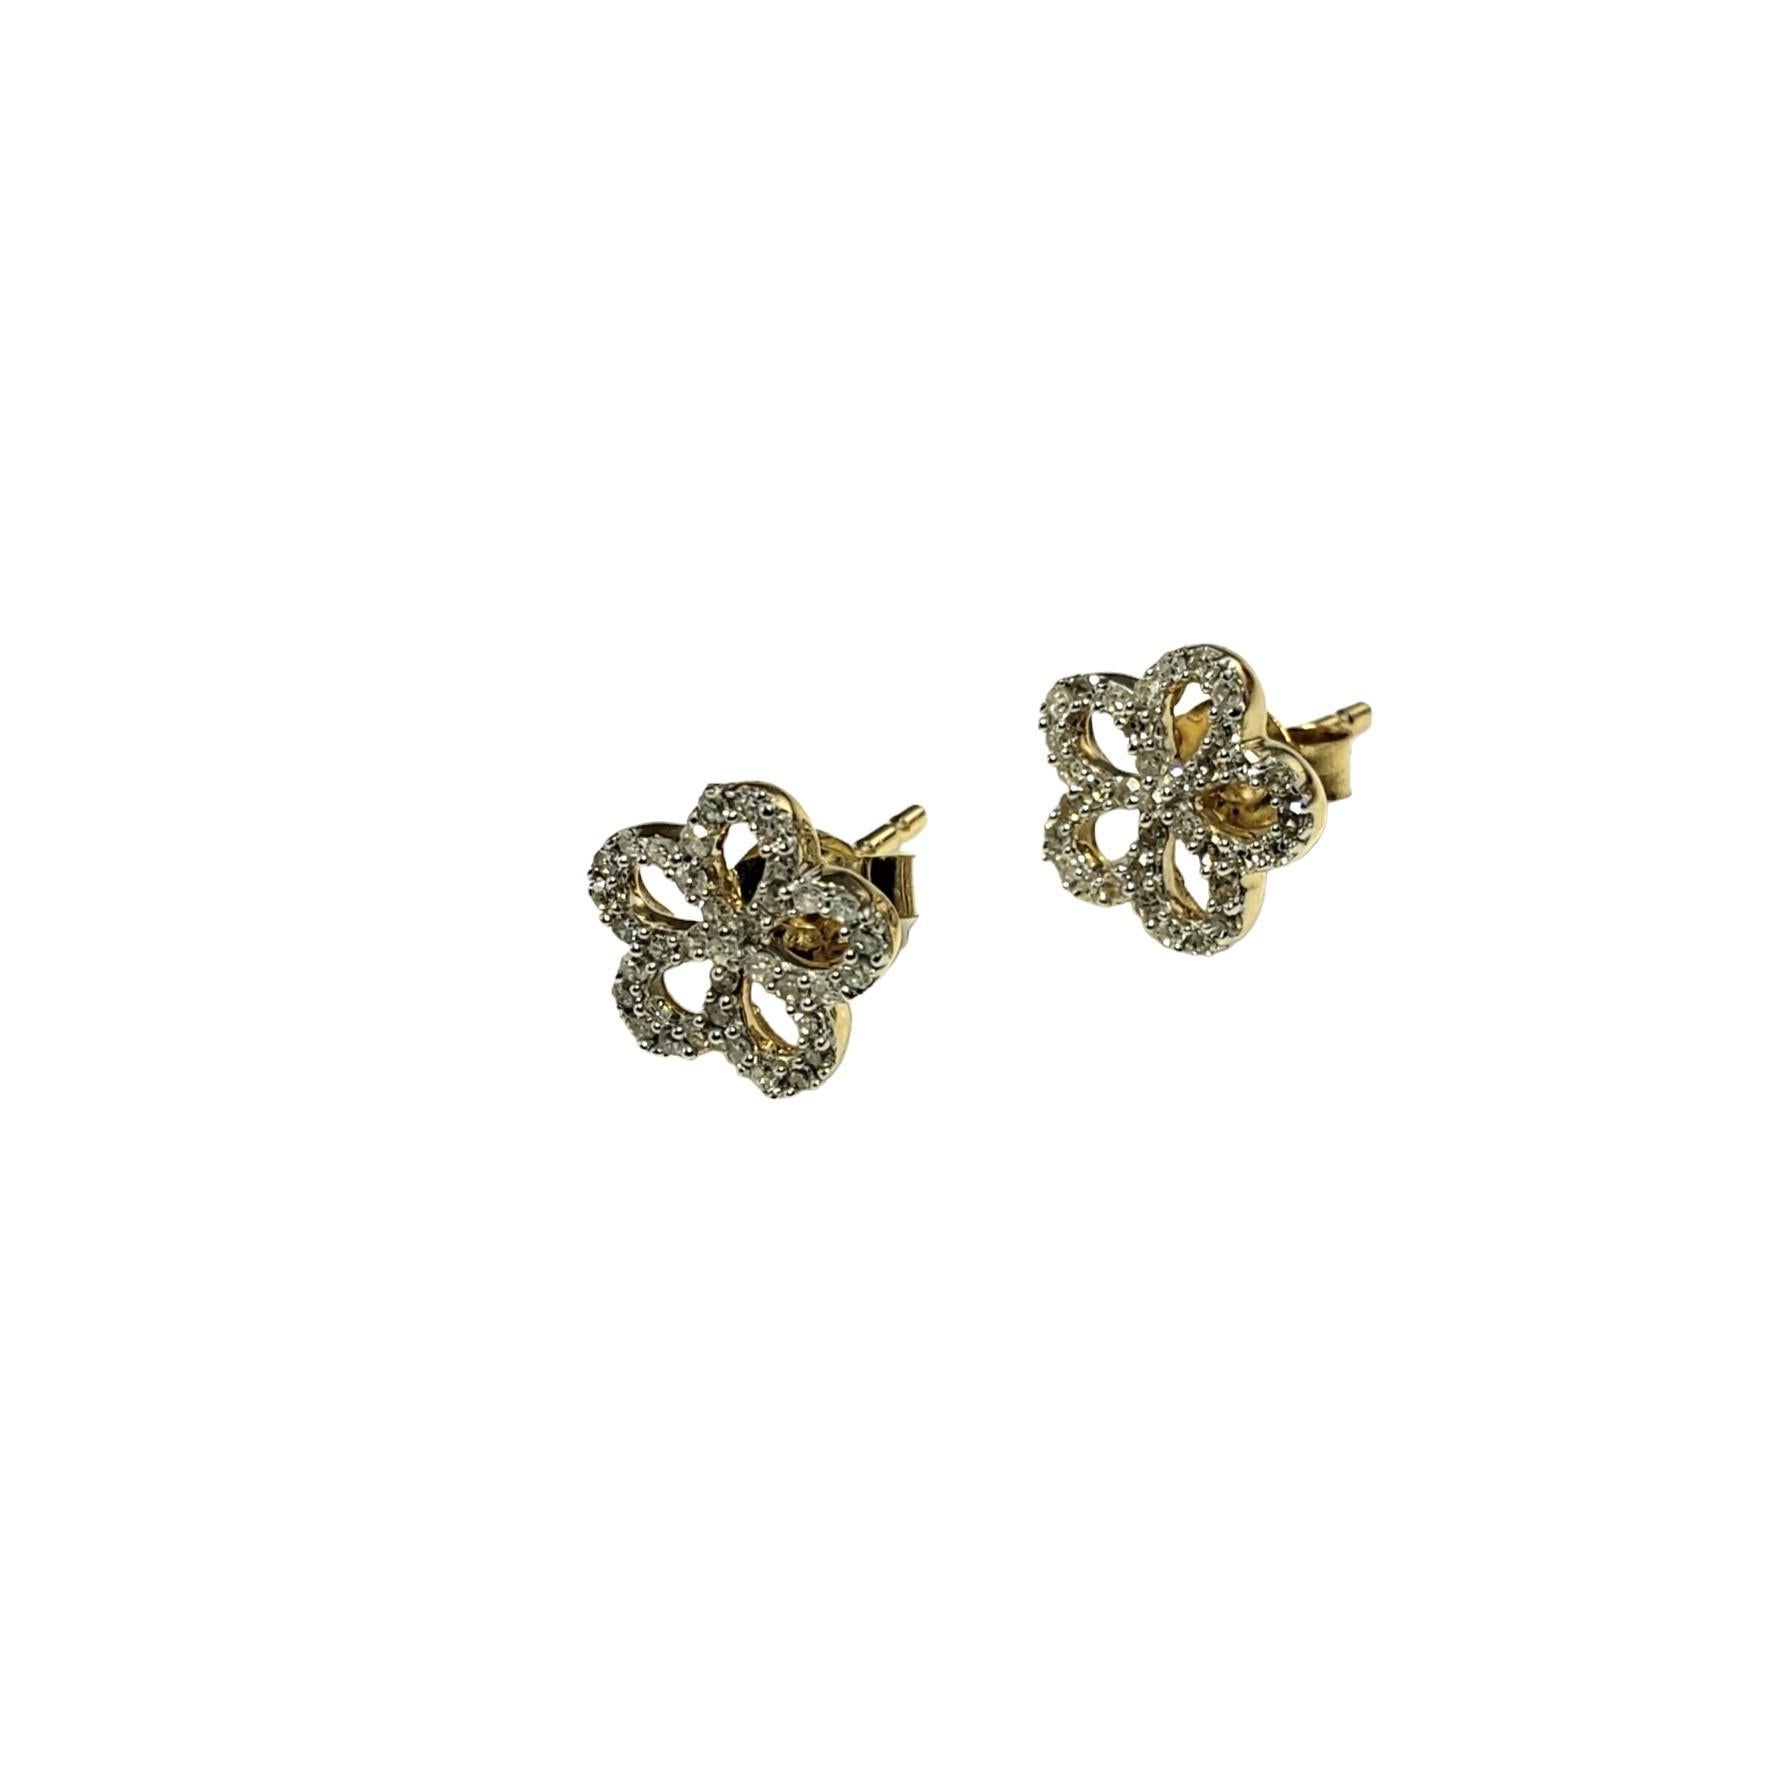 Vintage 14 Karat Yellow Gold and Diamond Earrings-

These sparkling earrings each feature 36 round single cut diamonds set in classic 14K yellow gold.  Push back closures.

Approximate total diamond weight: .20 ct.

Diamond color: I

Diamond